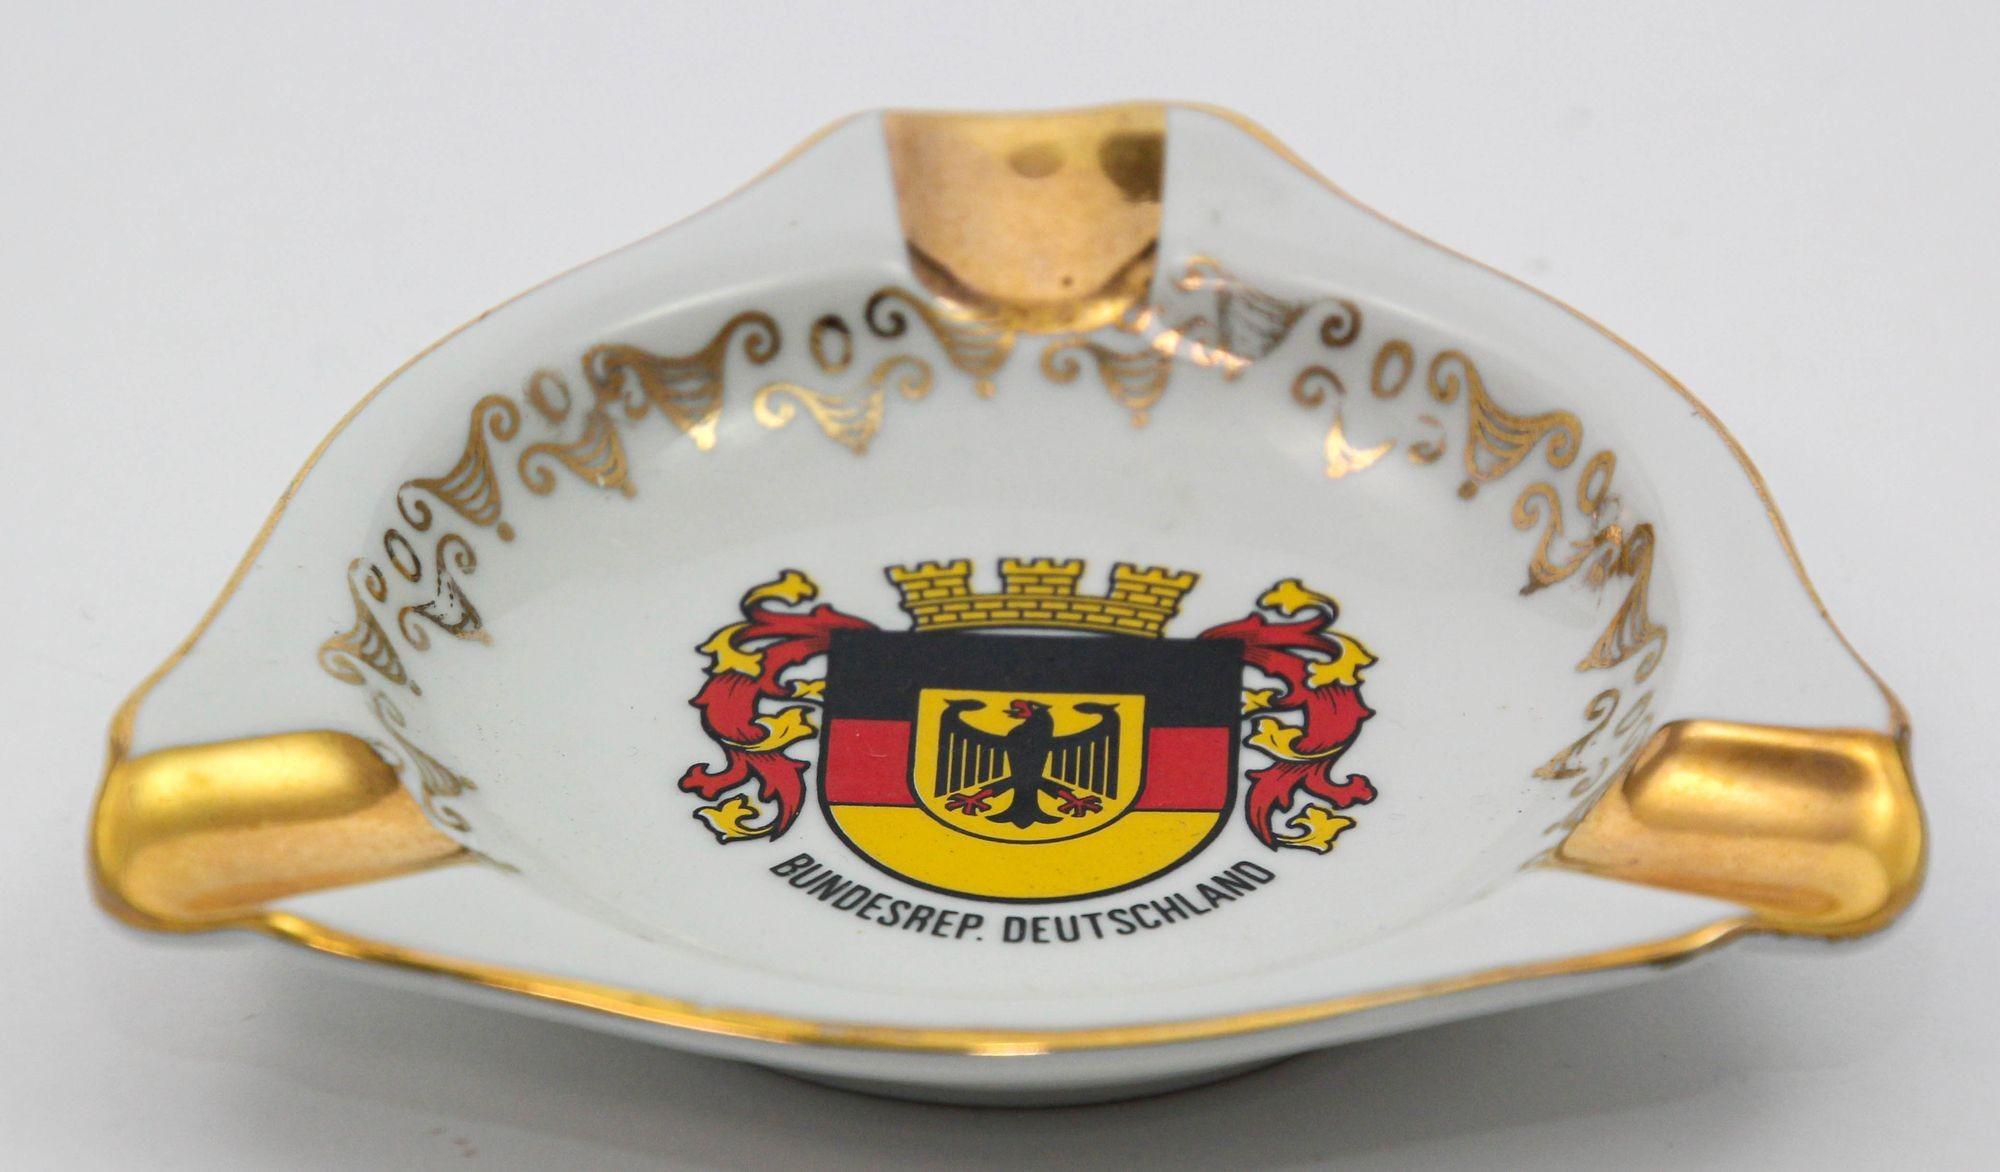 Vintage Made in Germany Souvenir Porcelain Ashtray Collectible Limited Edition For Sale 1